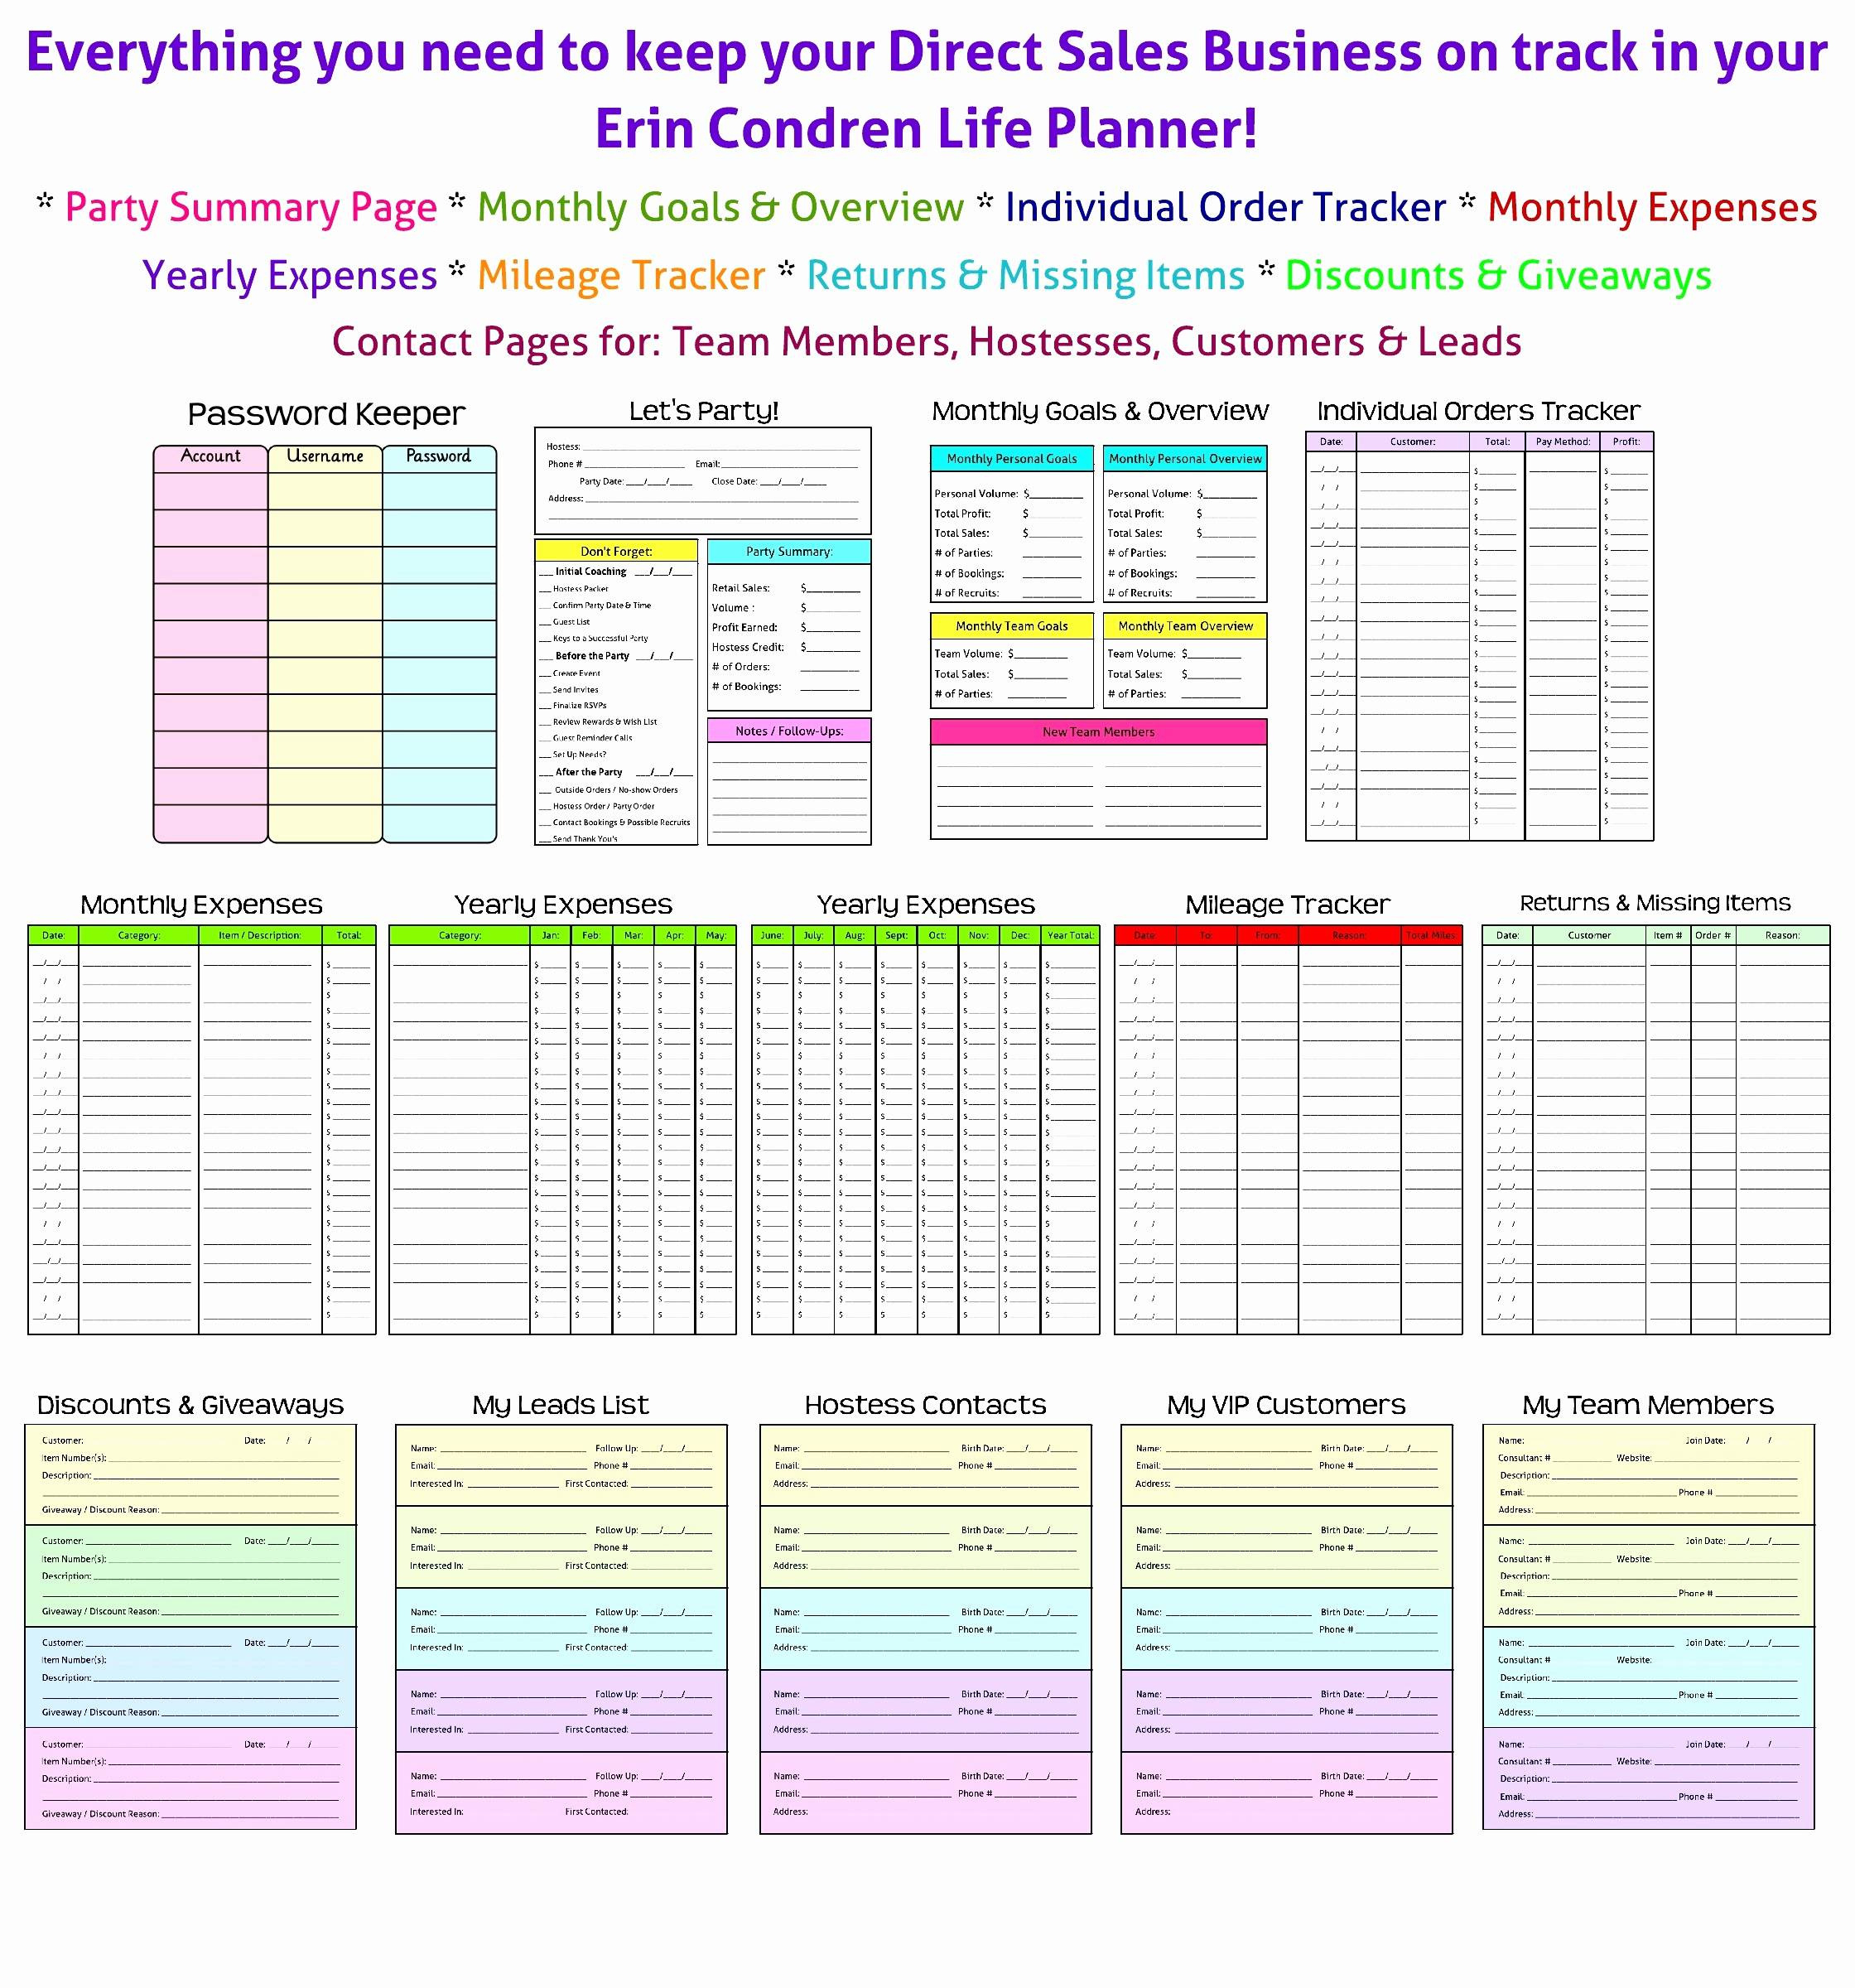 Sales Goal Tracking Spreadsheet Awesome Free Spreadsheets Templates throughout Free Sales Tracking Spreadsheet Template